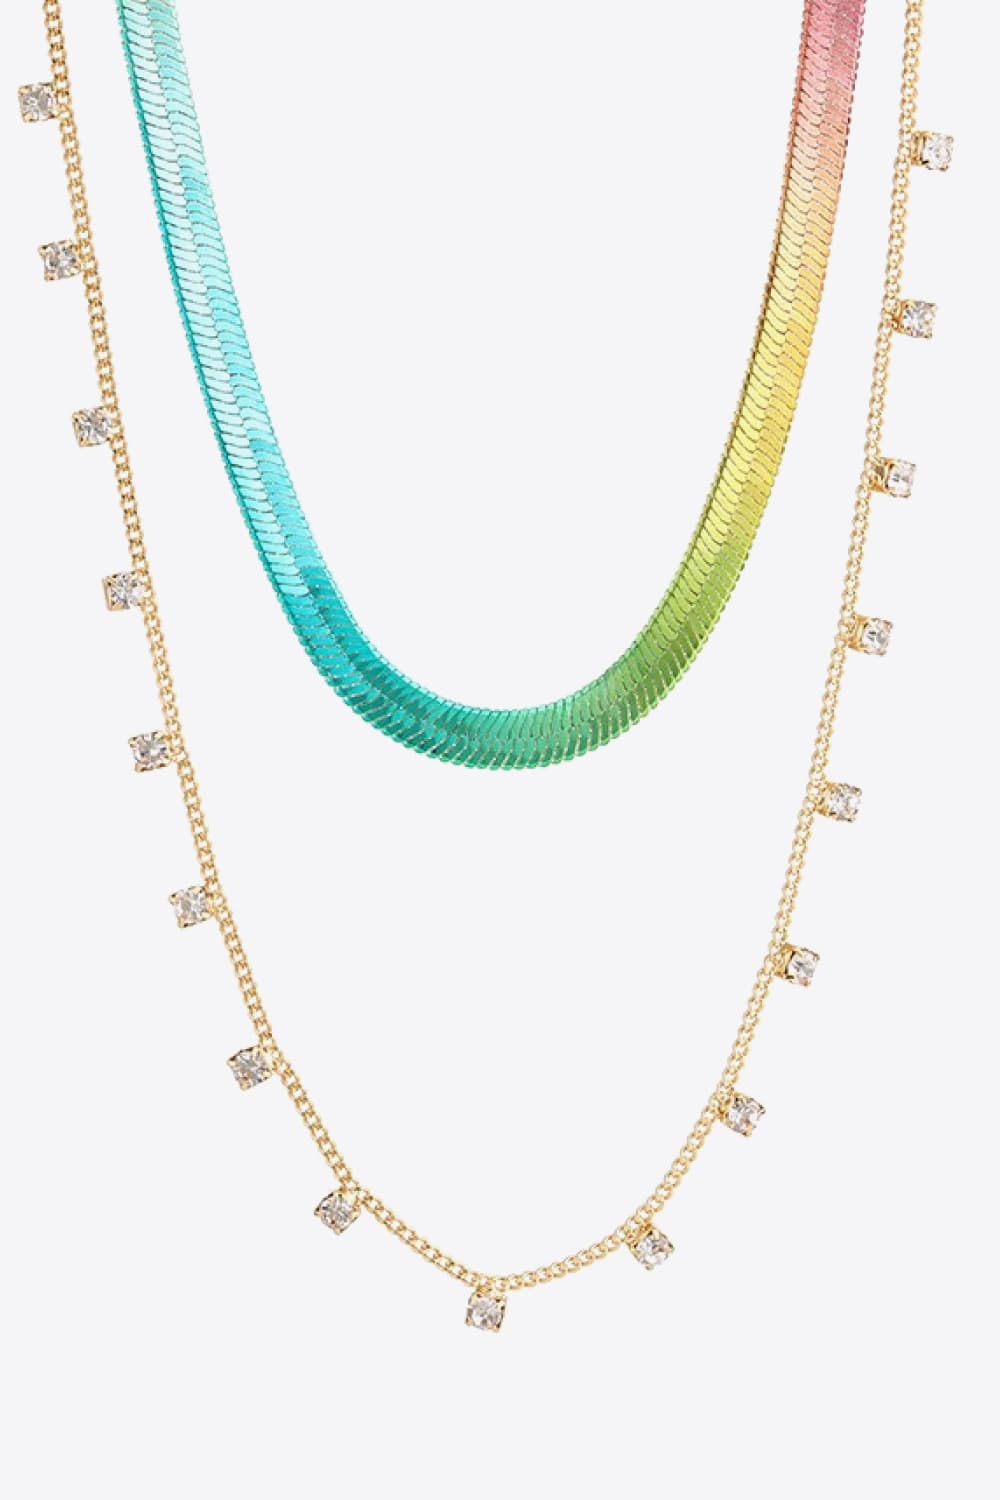 Gradient Herringbone Chain Double-Layered Necklace - Necklaces - FITGGINS